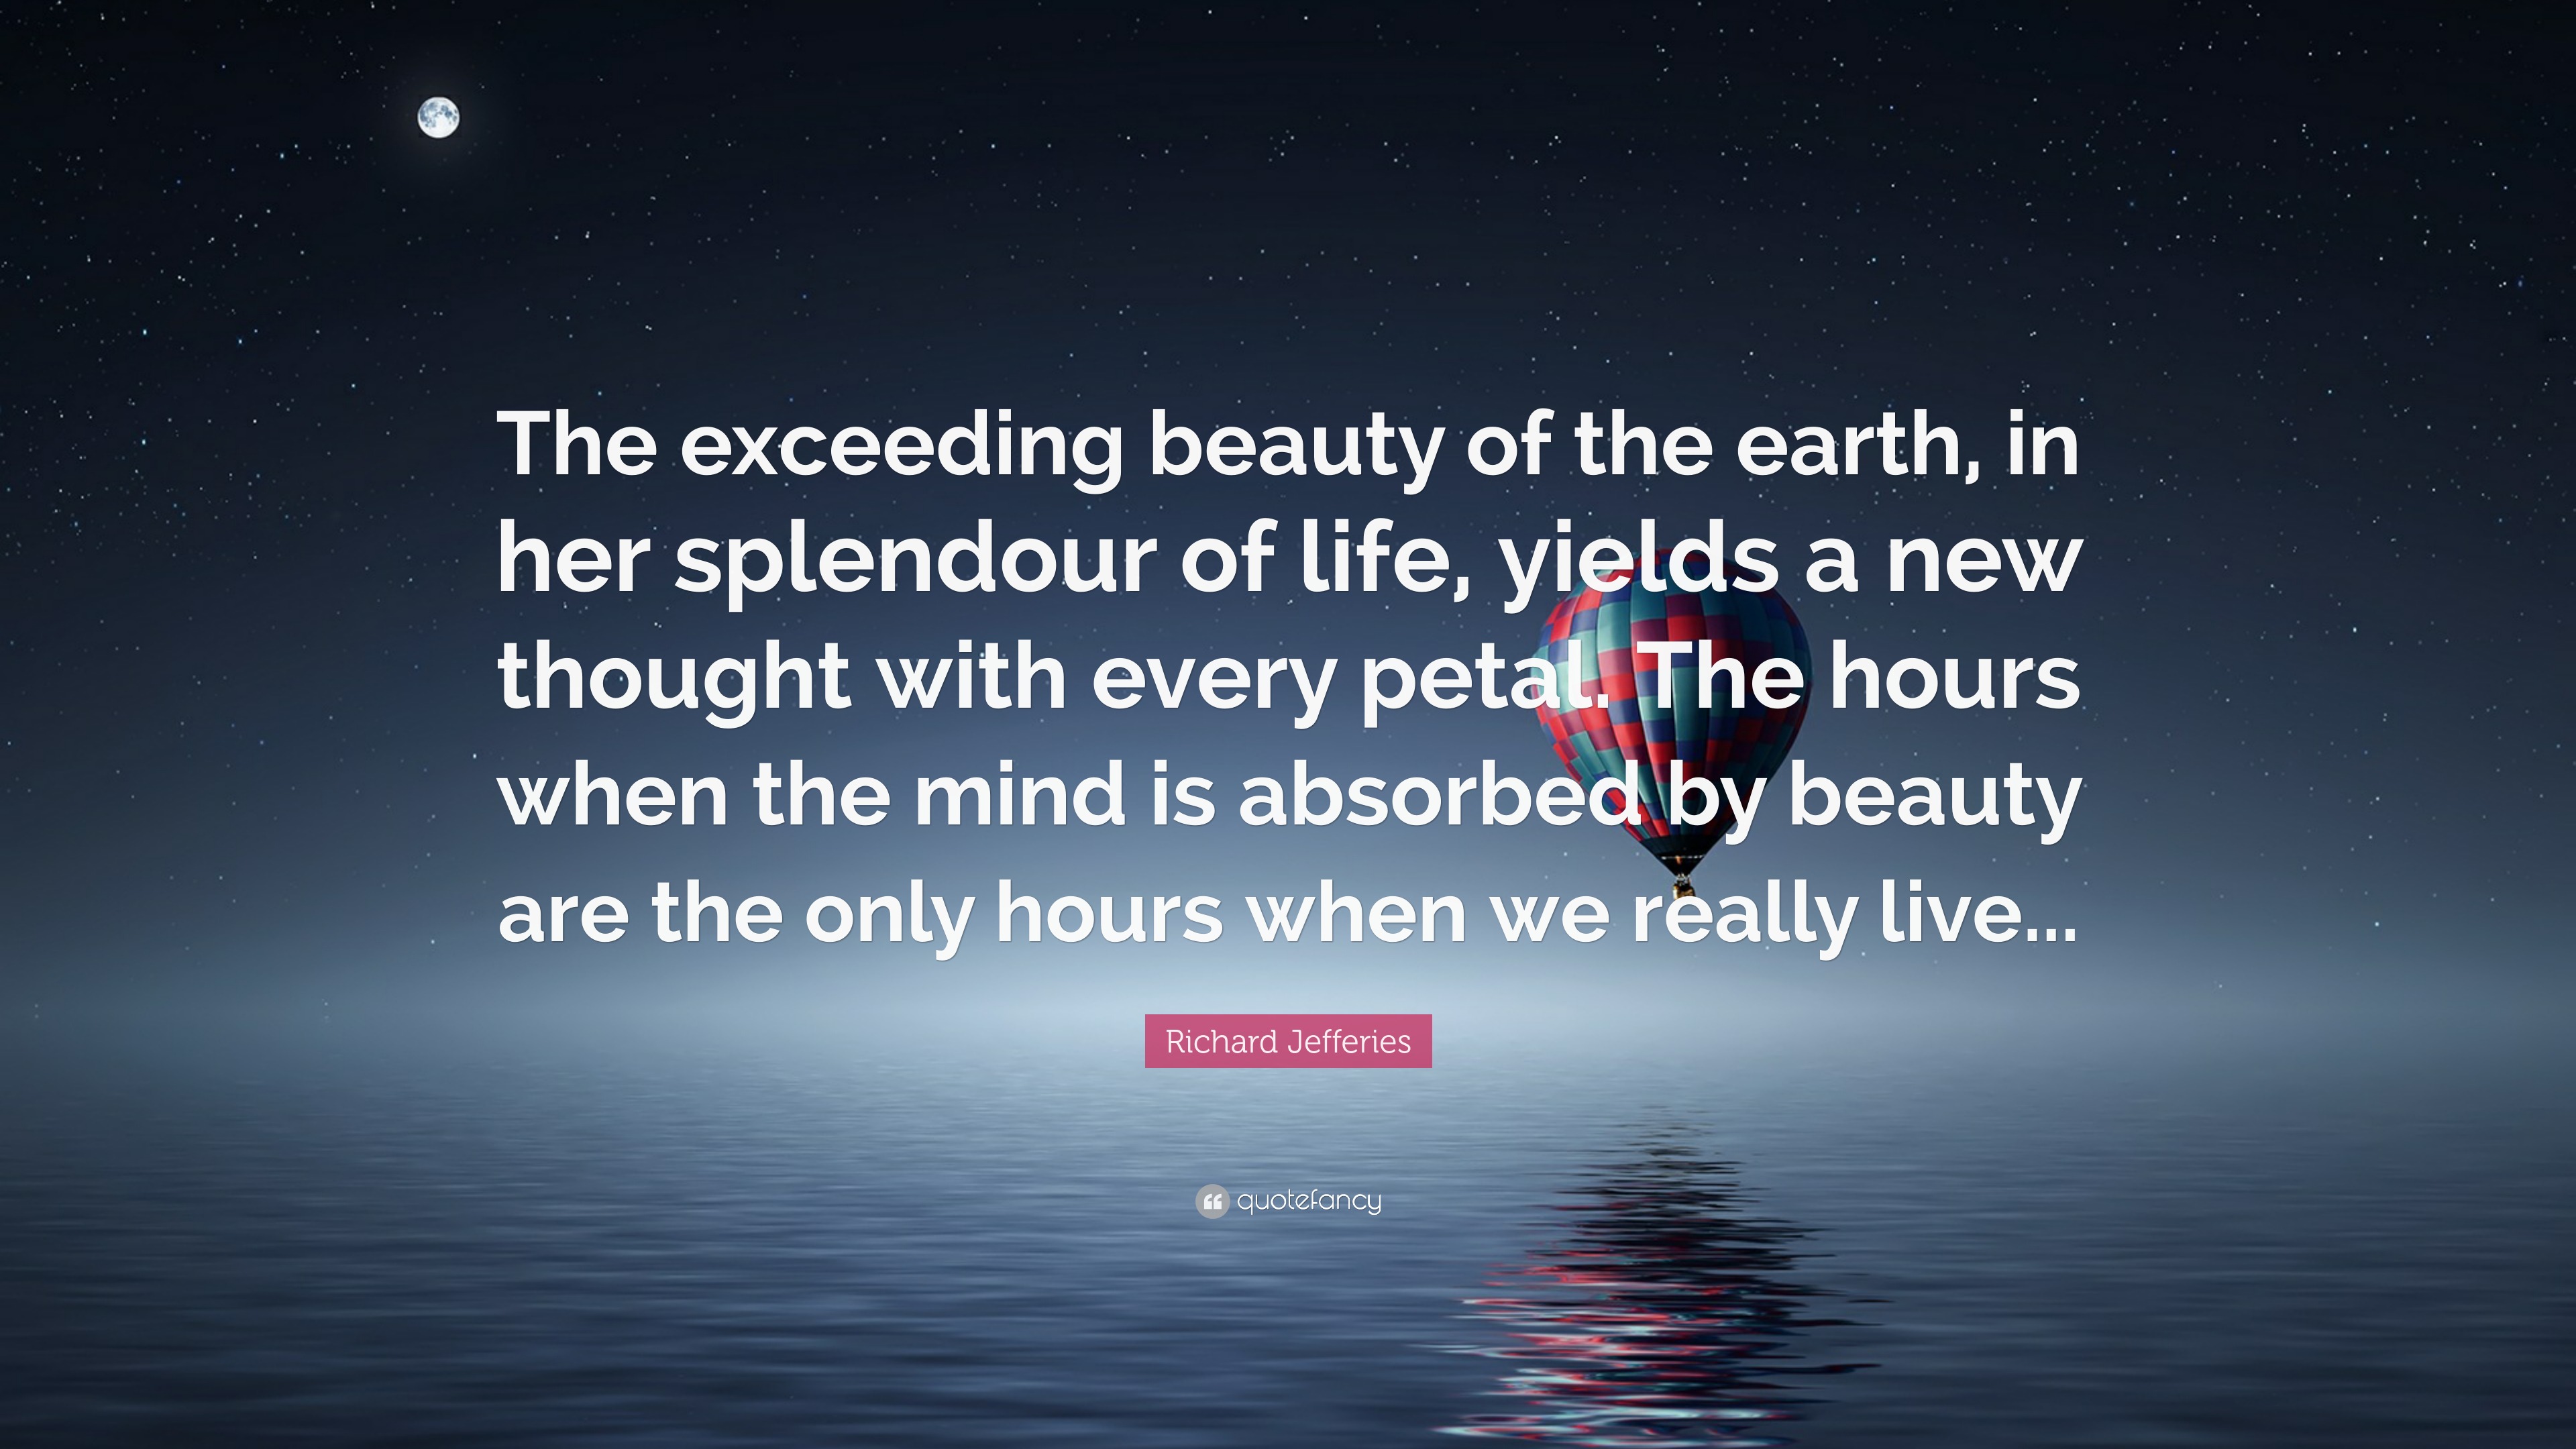 Richard Jefferies Quote: “The exceeding beauty of the earth, in her ...